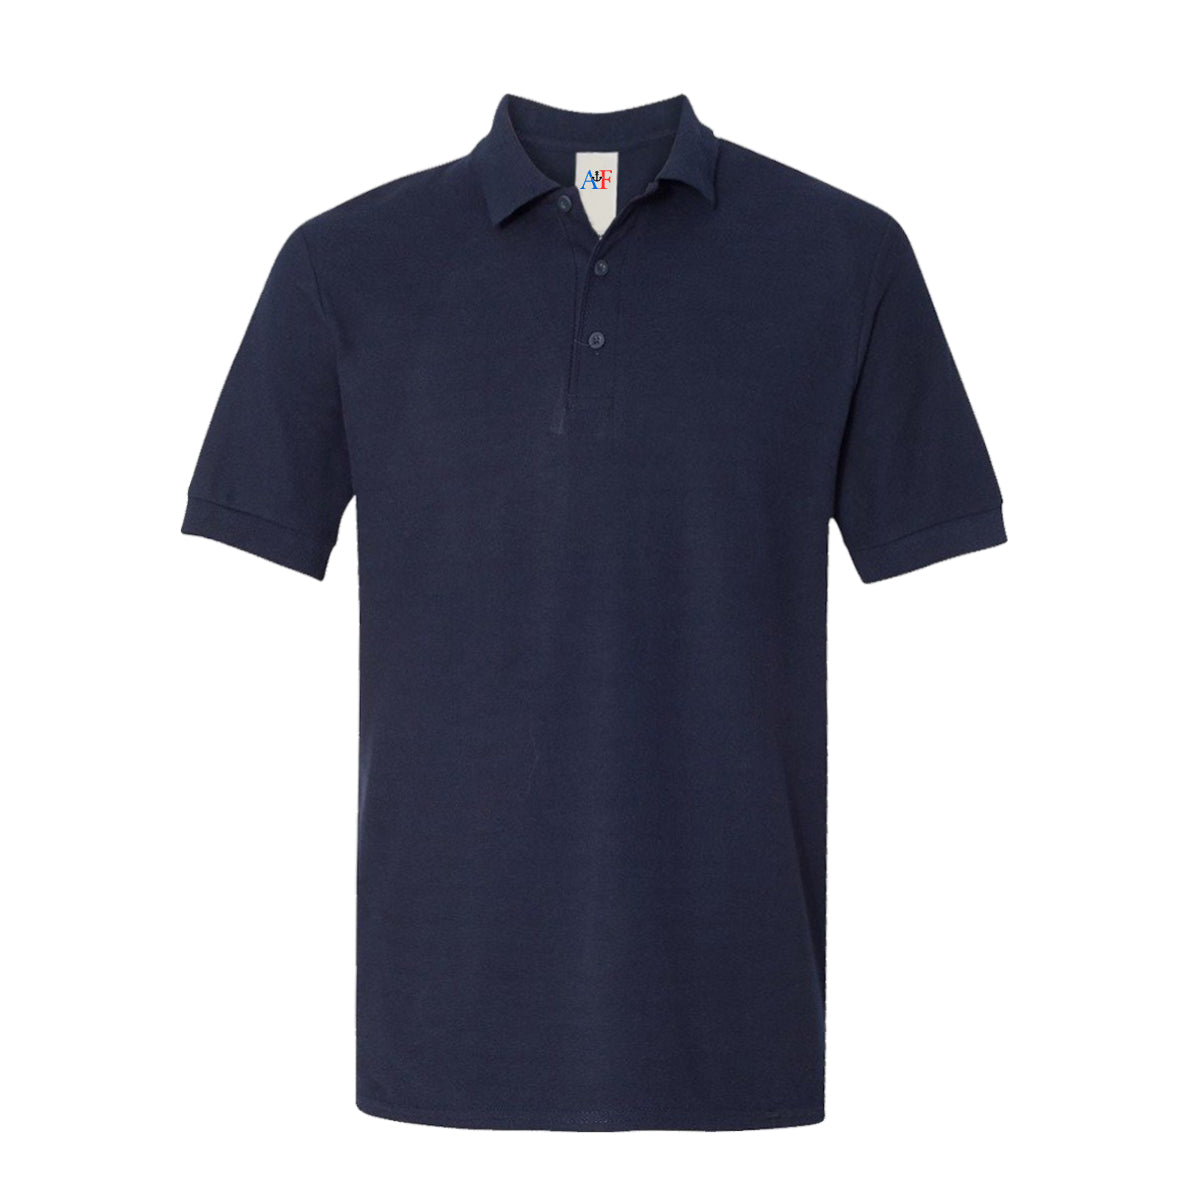 8000 Adults Performance Polo 6 Oz - Bright Navy